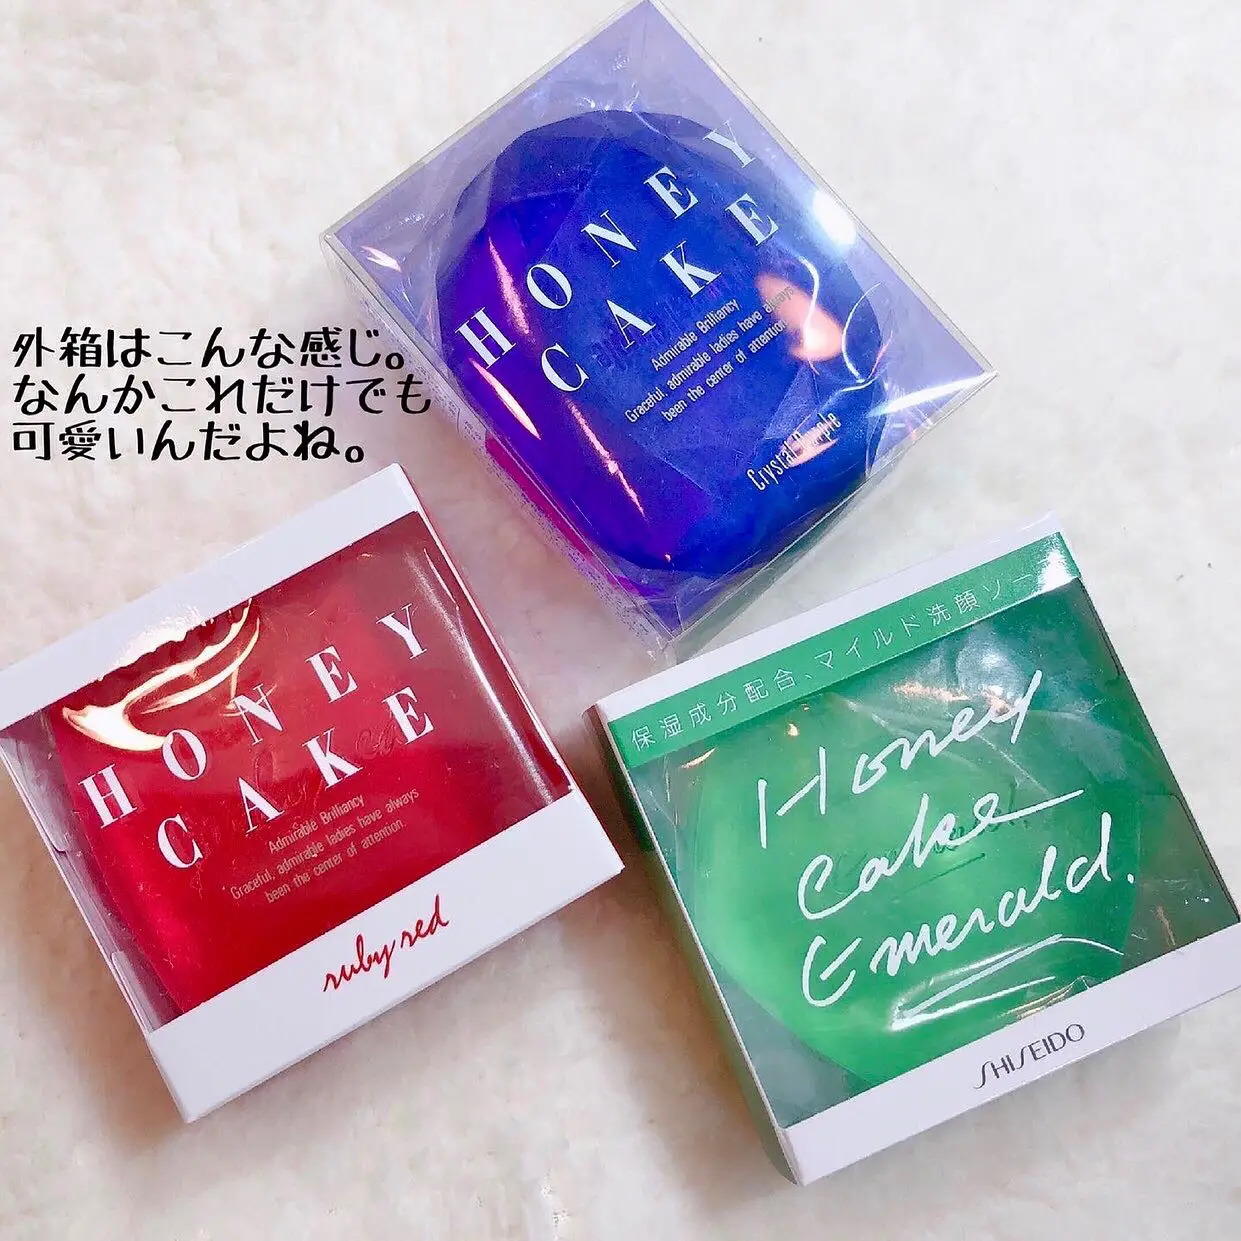 Shiseido Petit plastic soap    / | Gallery posted by チャンユカ